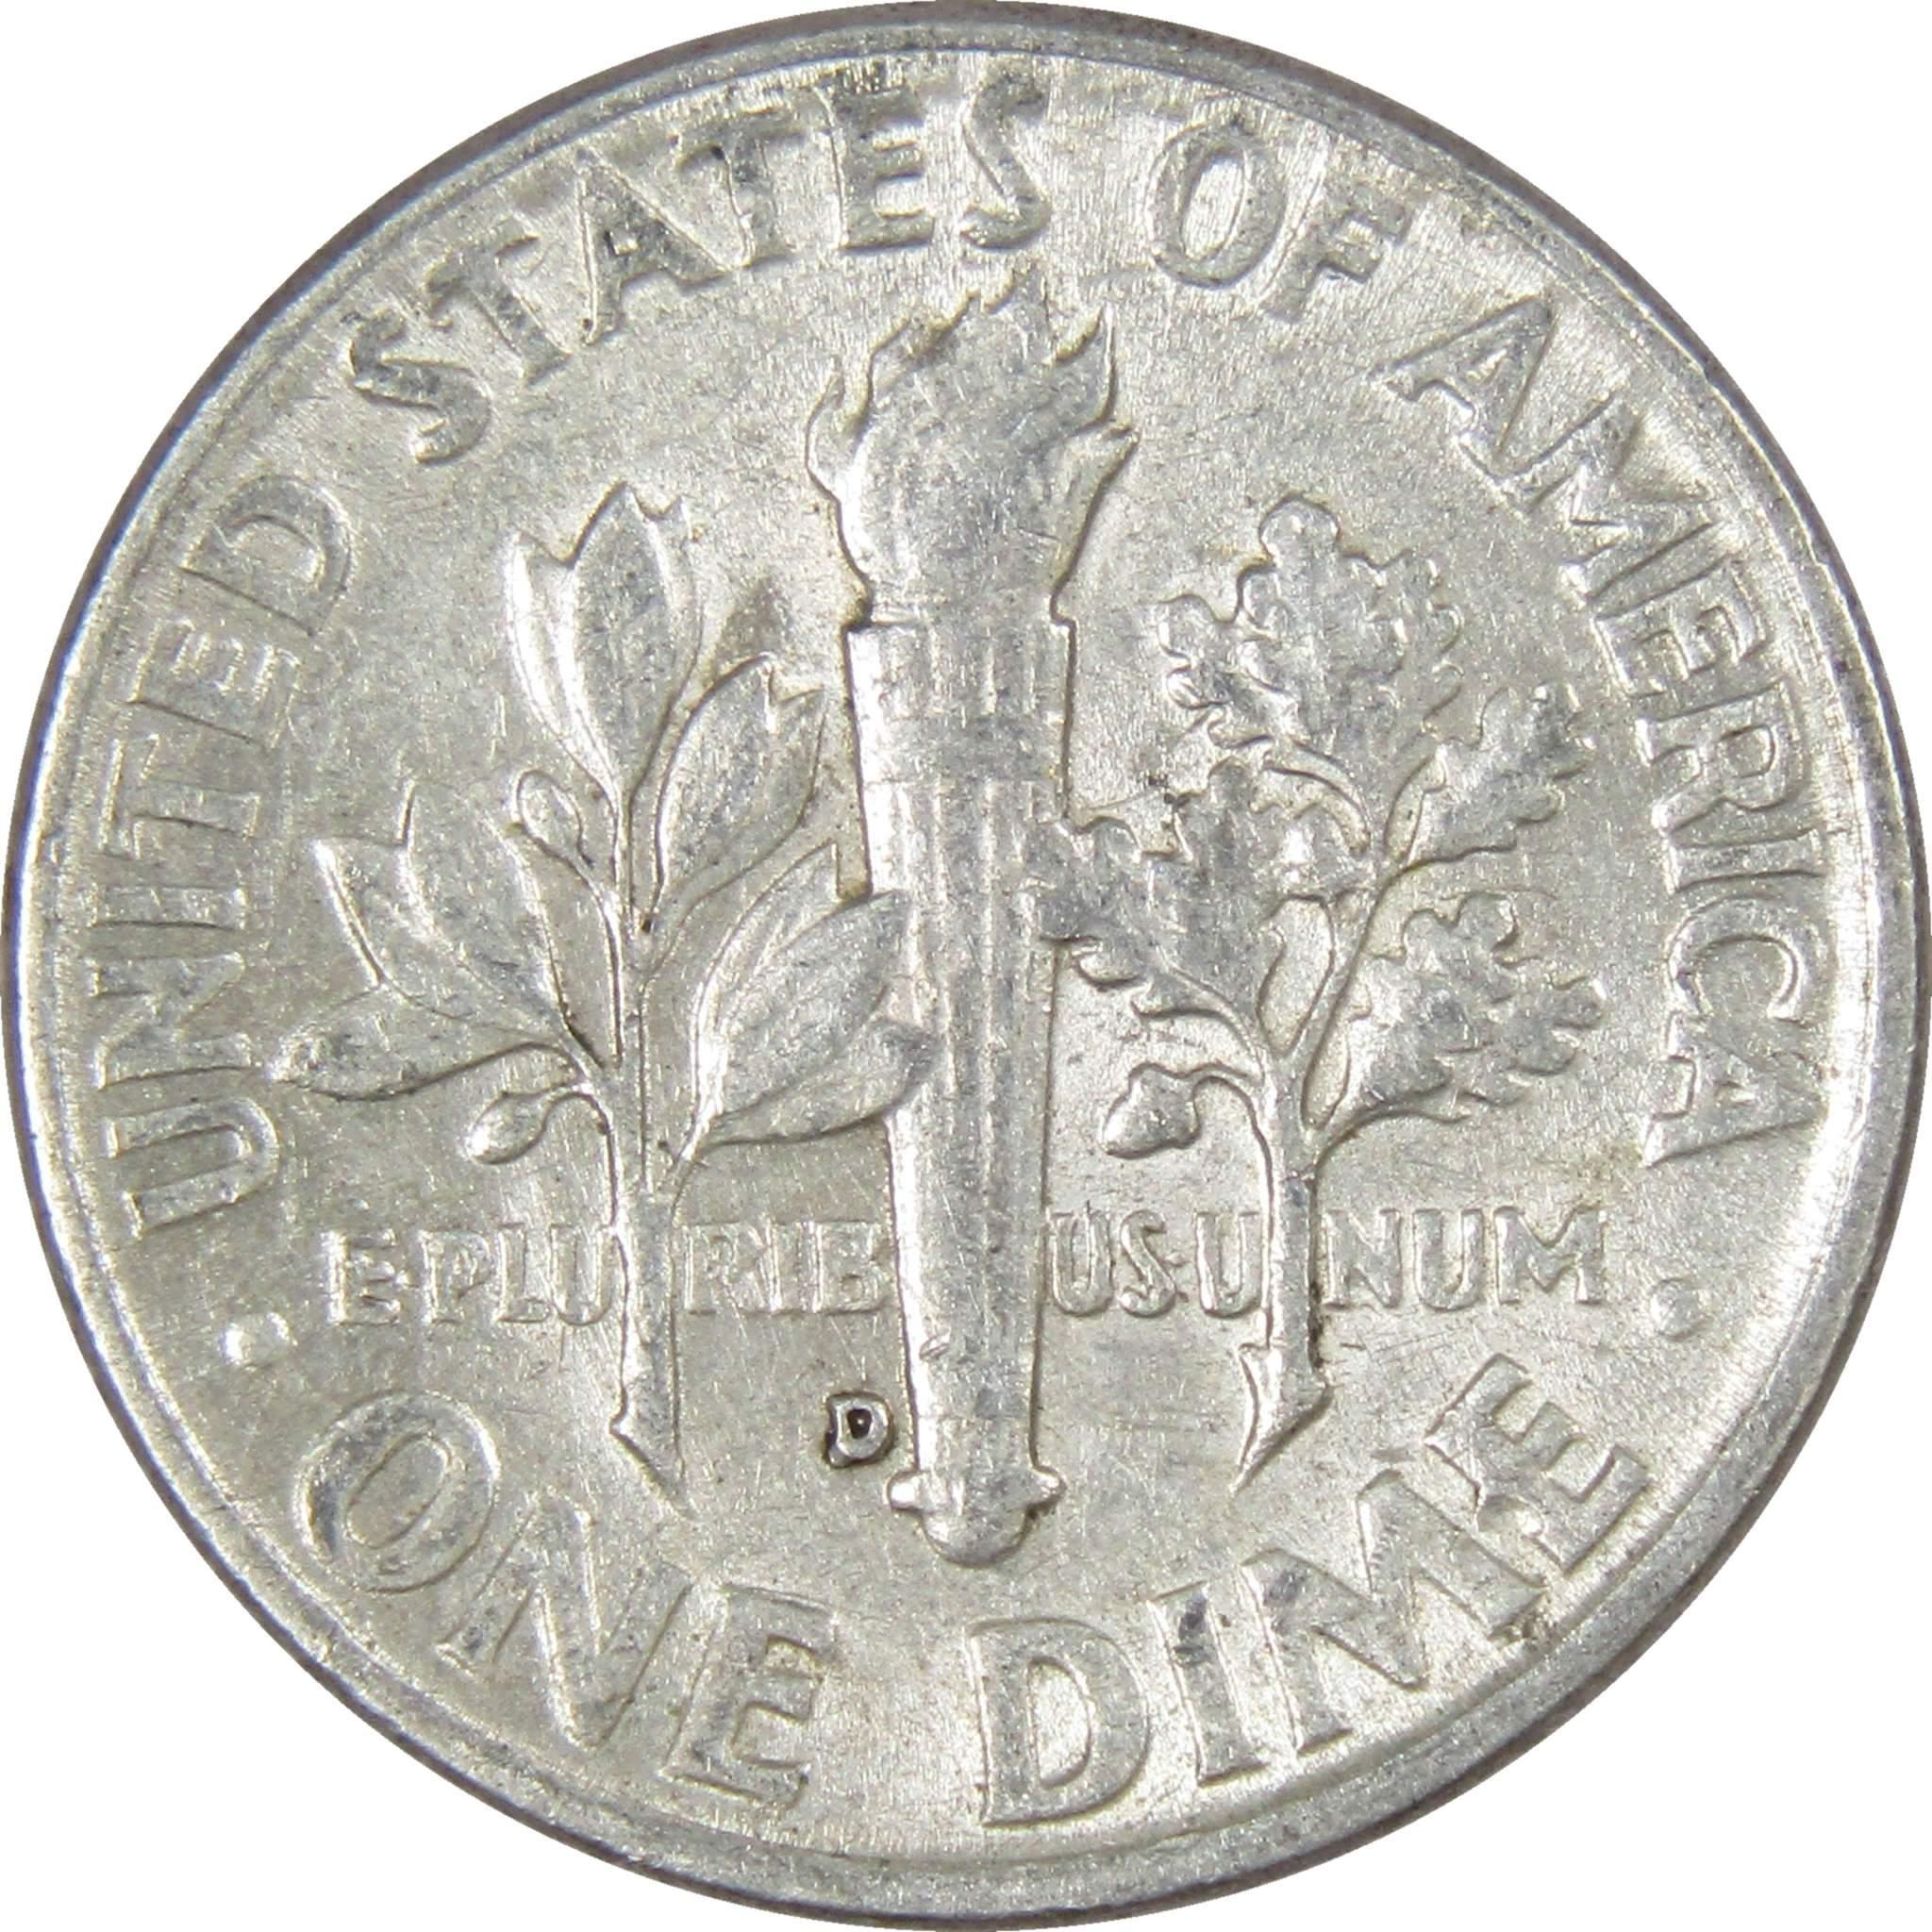 1961 D Roosevelt Dime AG About Good 90% Silver 10c US Coin Collectible